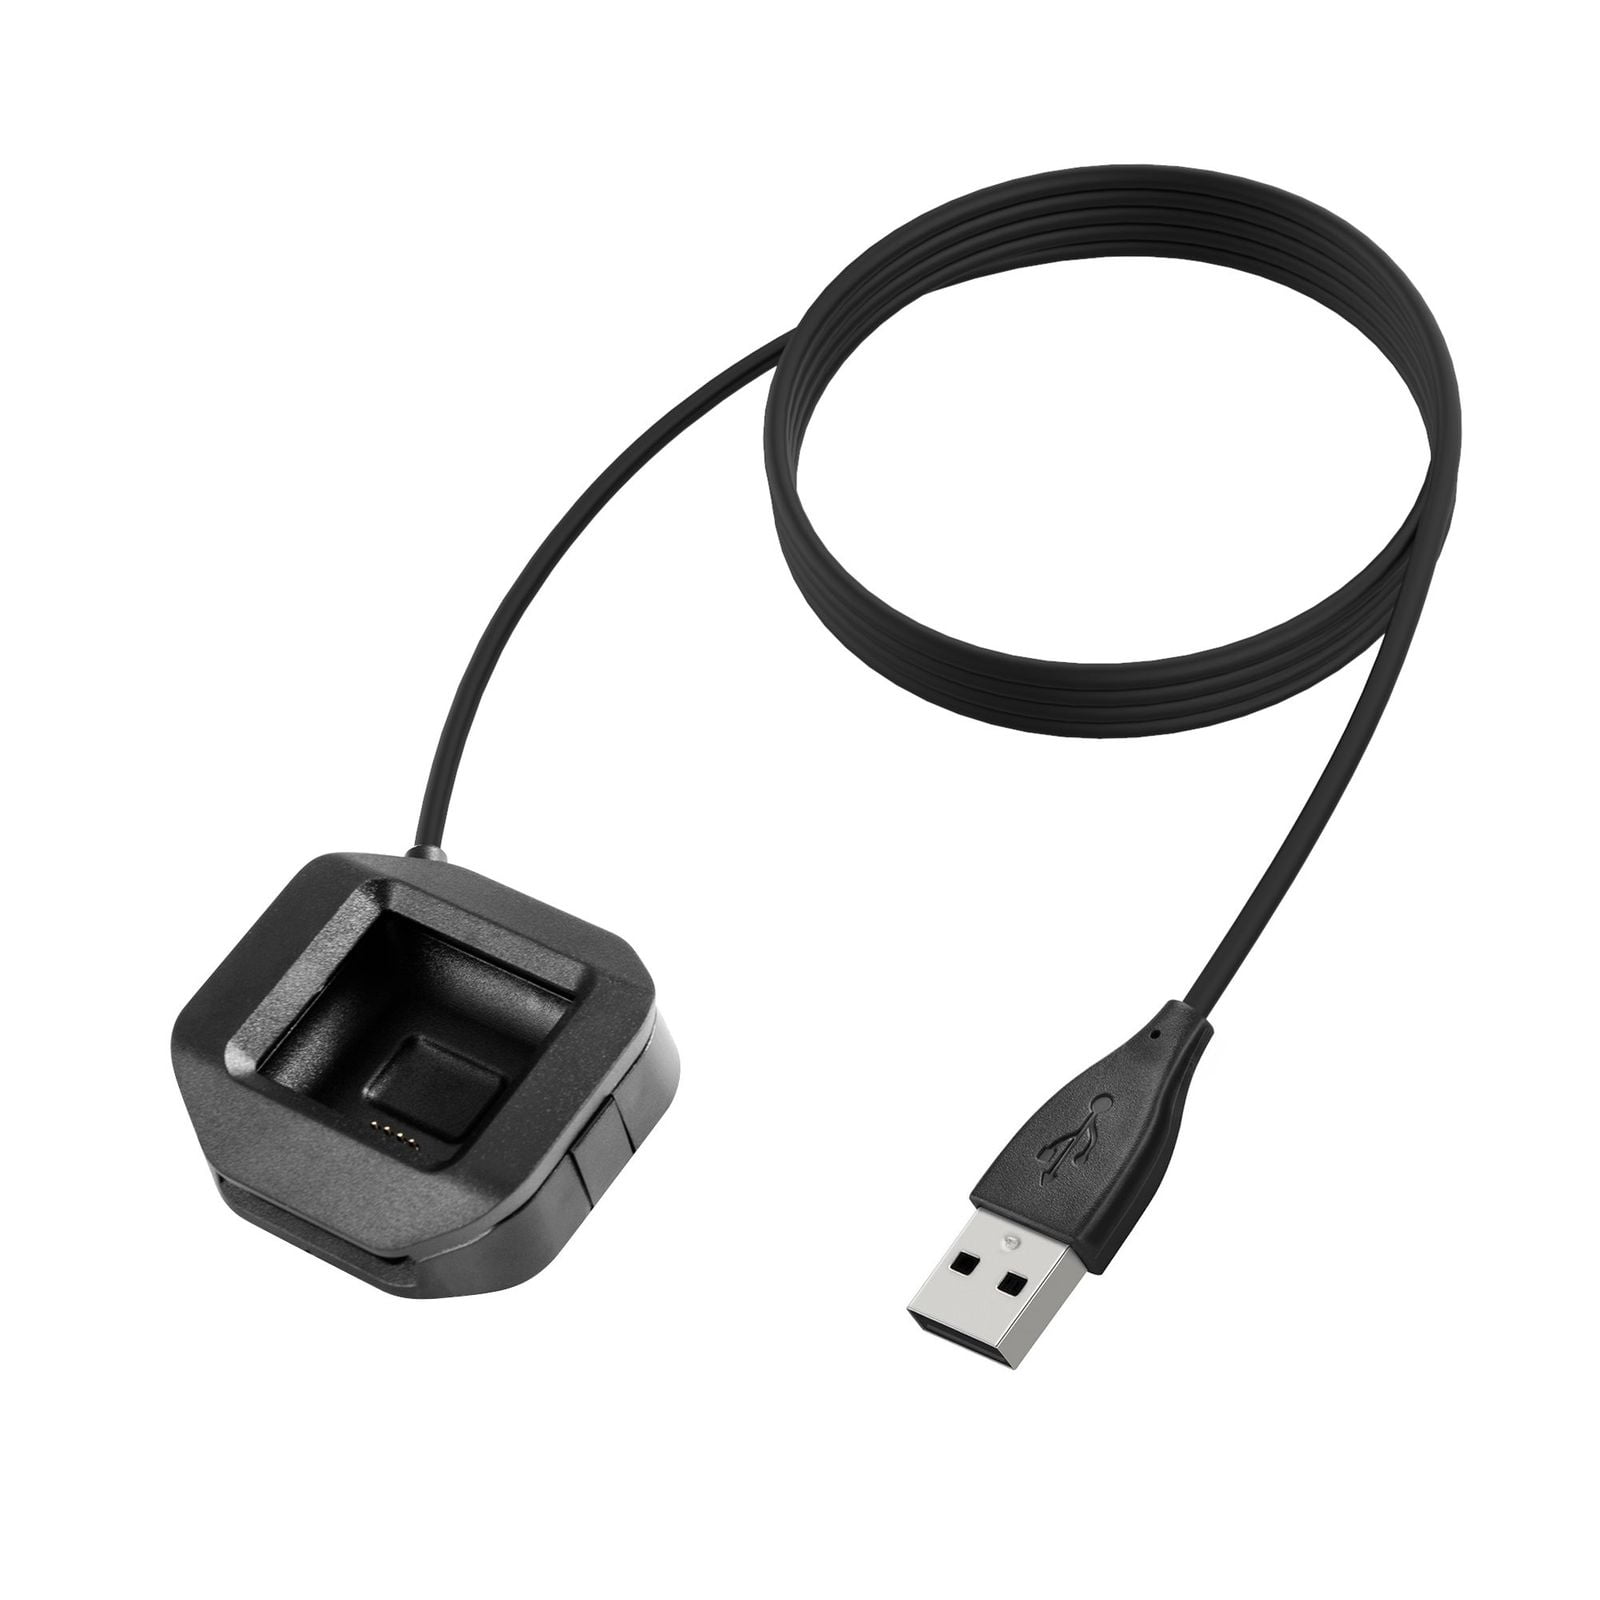 USB Charging Cable Power Charger Dock Cradle for FitBit Blaze Watc.TM 